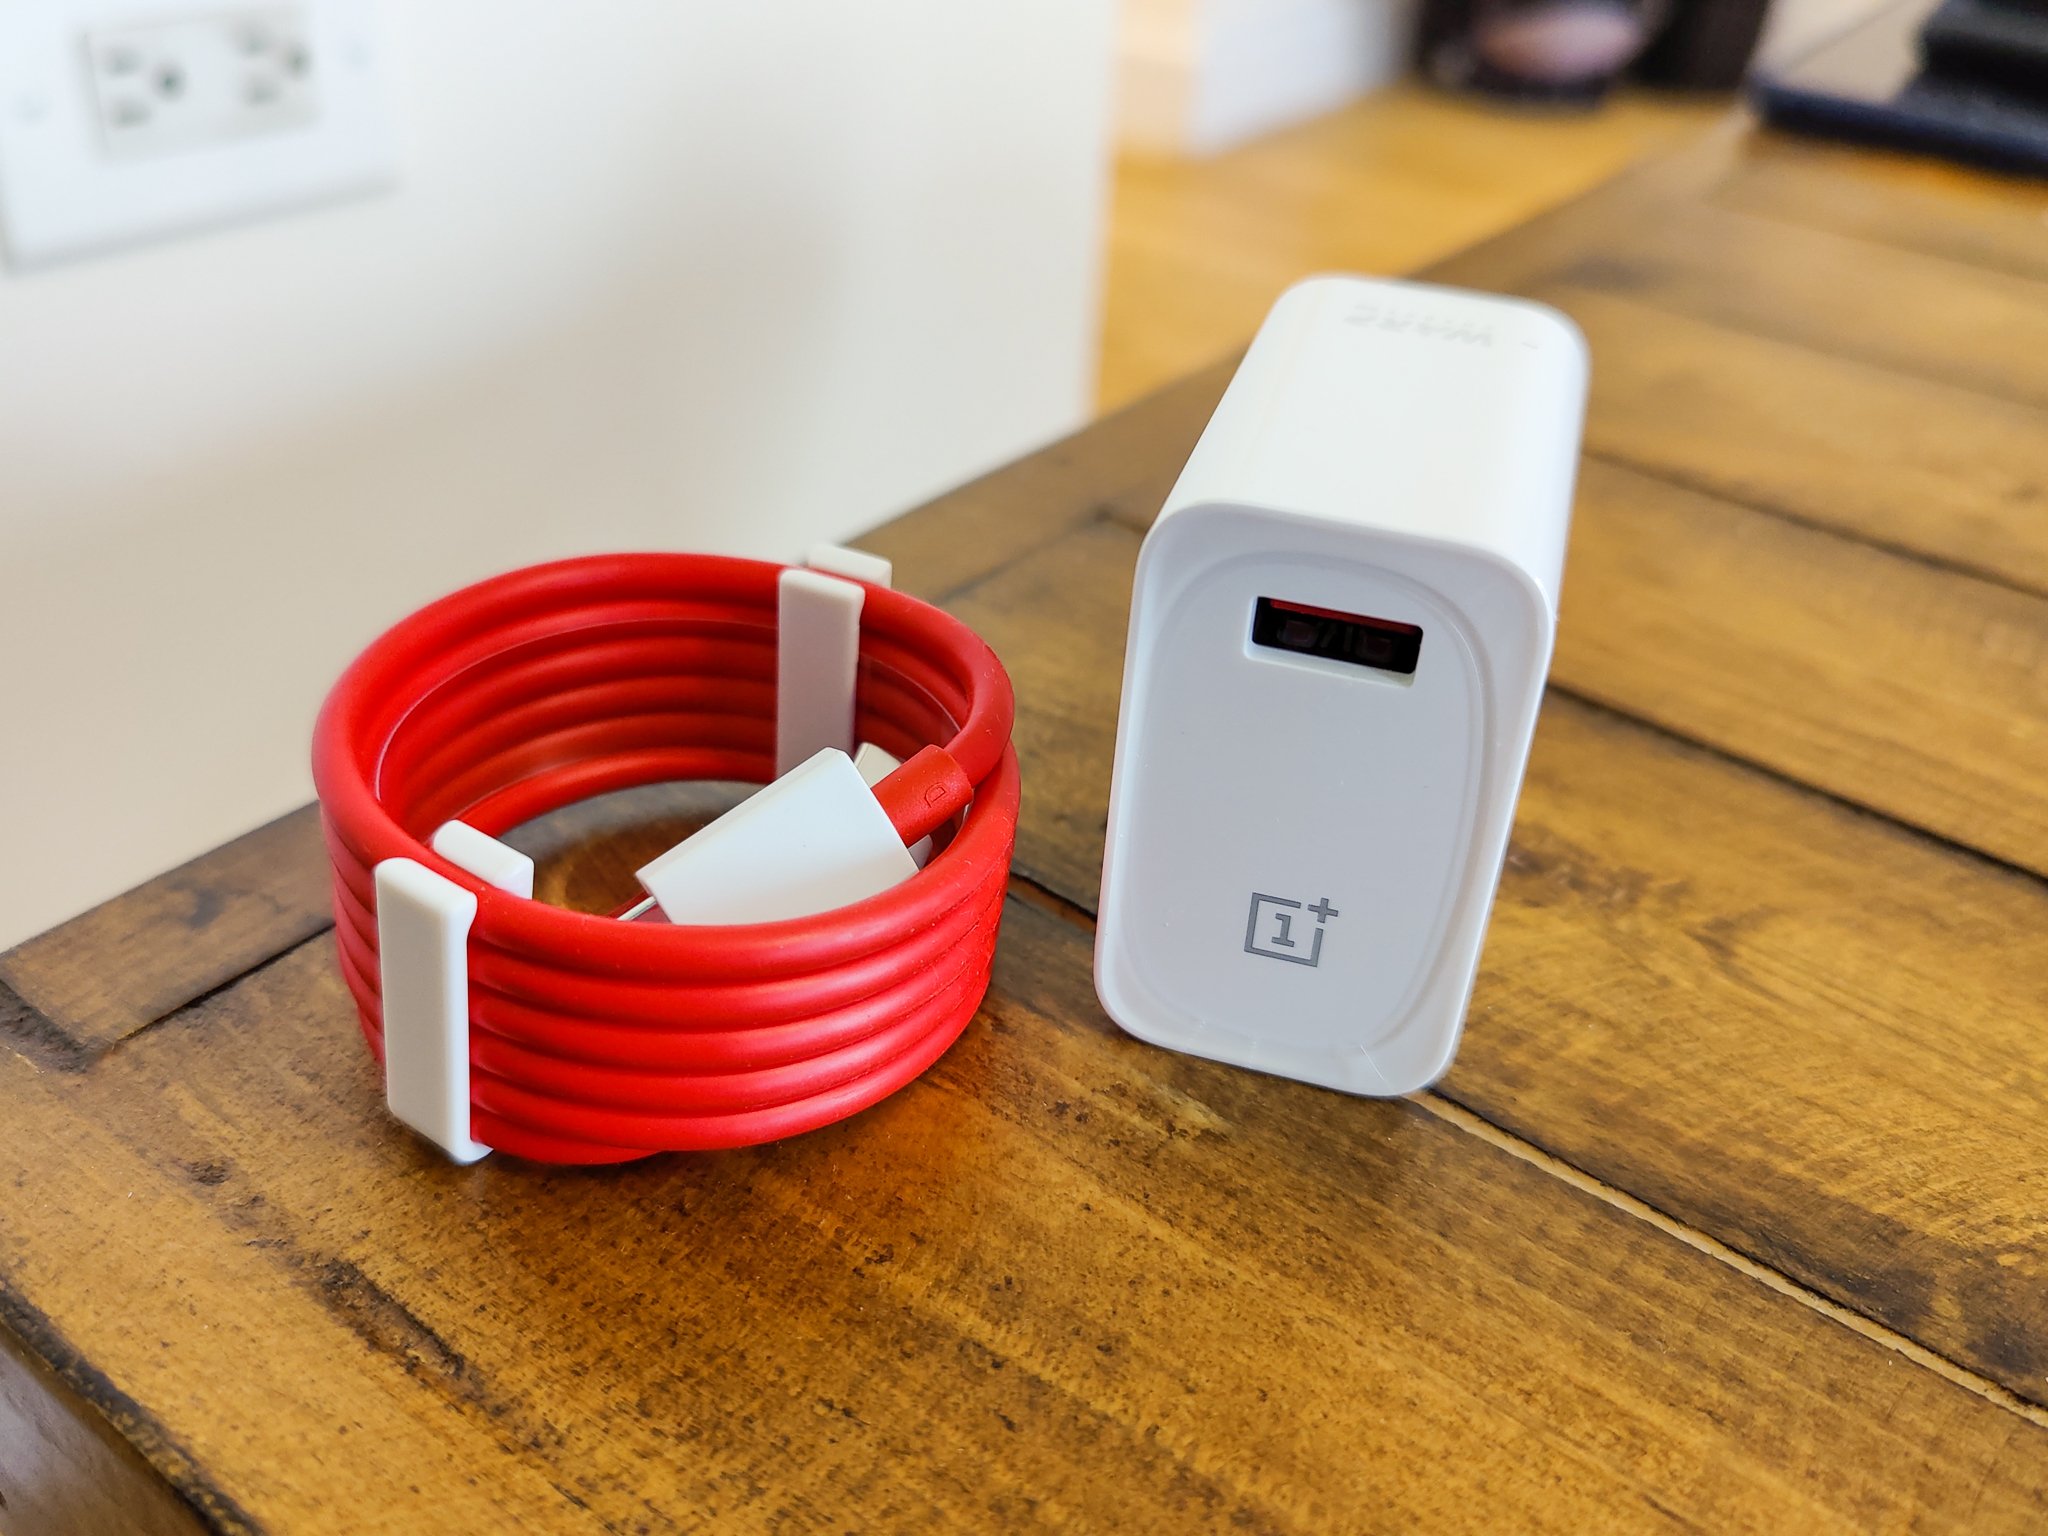 OnePlus Warp Charge charger